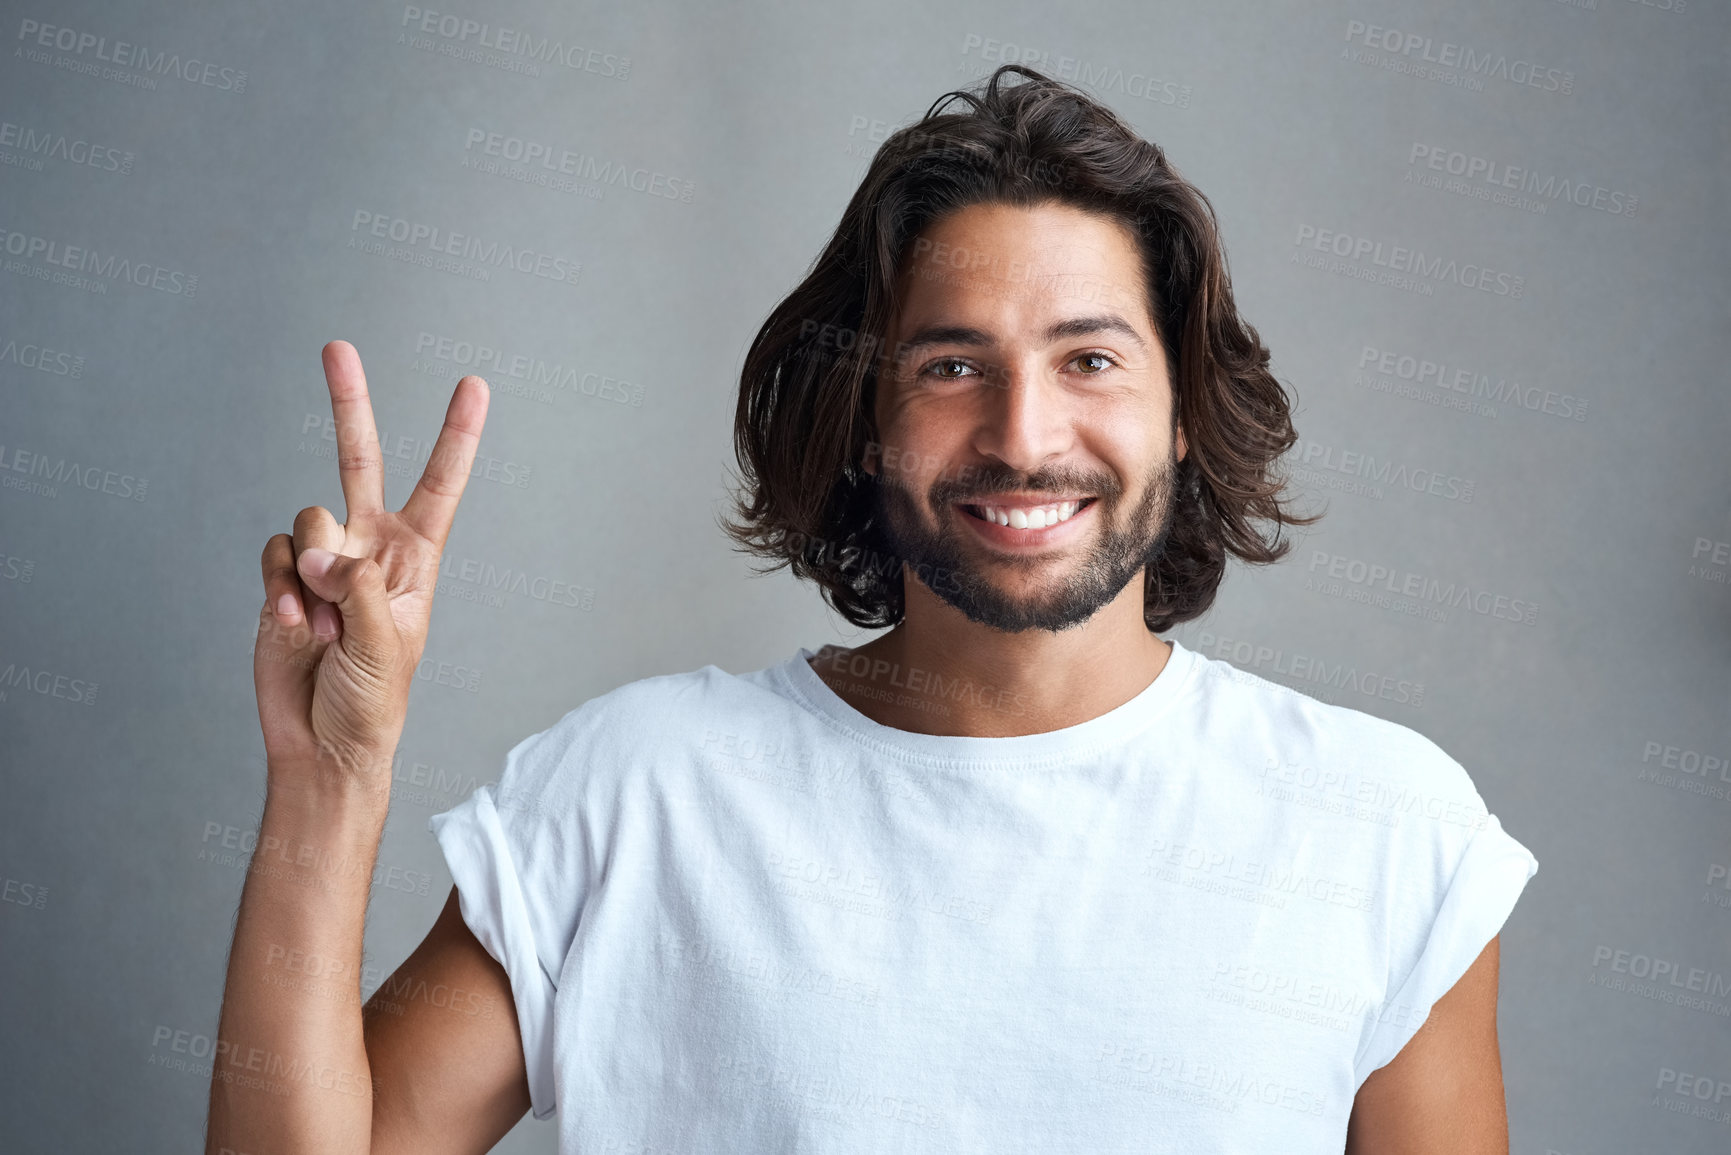 Buy stock photo Studio portrait of a young man showing a peace gesture against a grey background